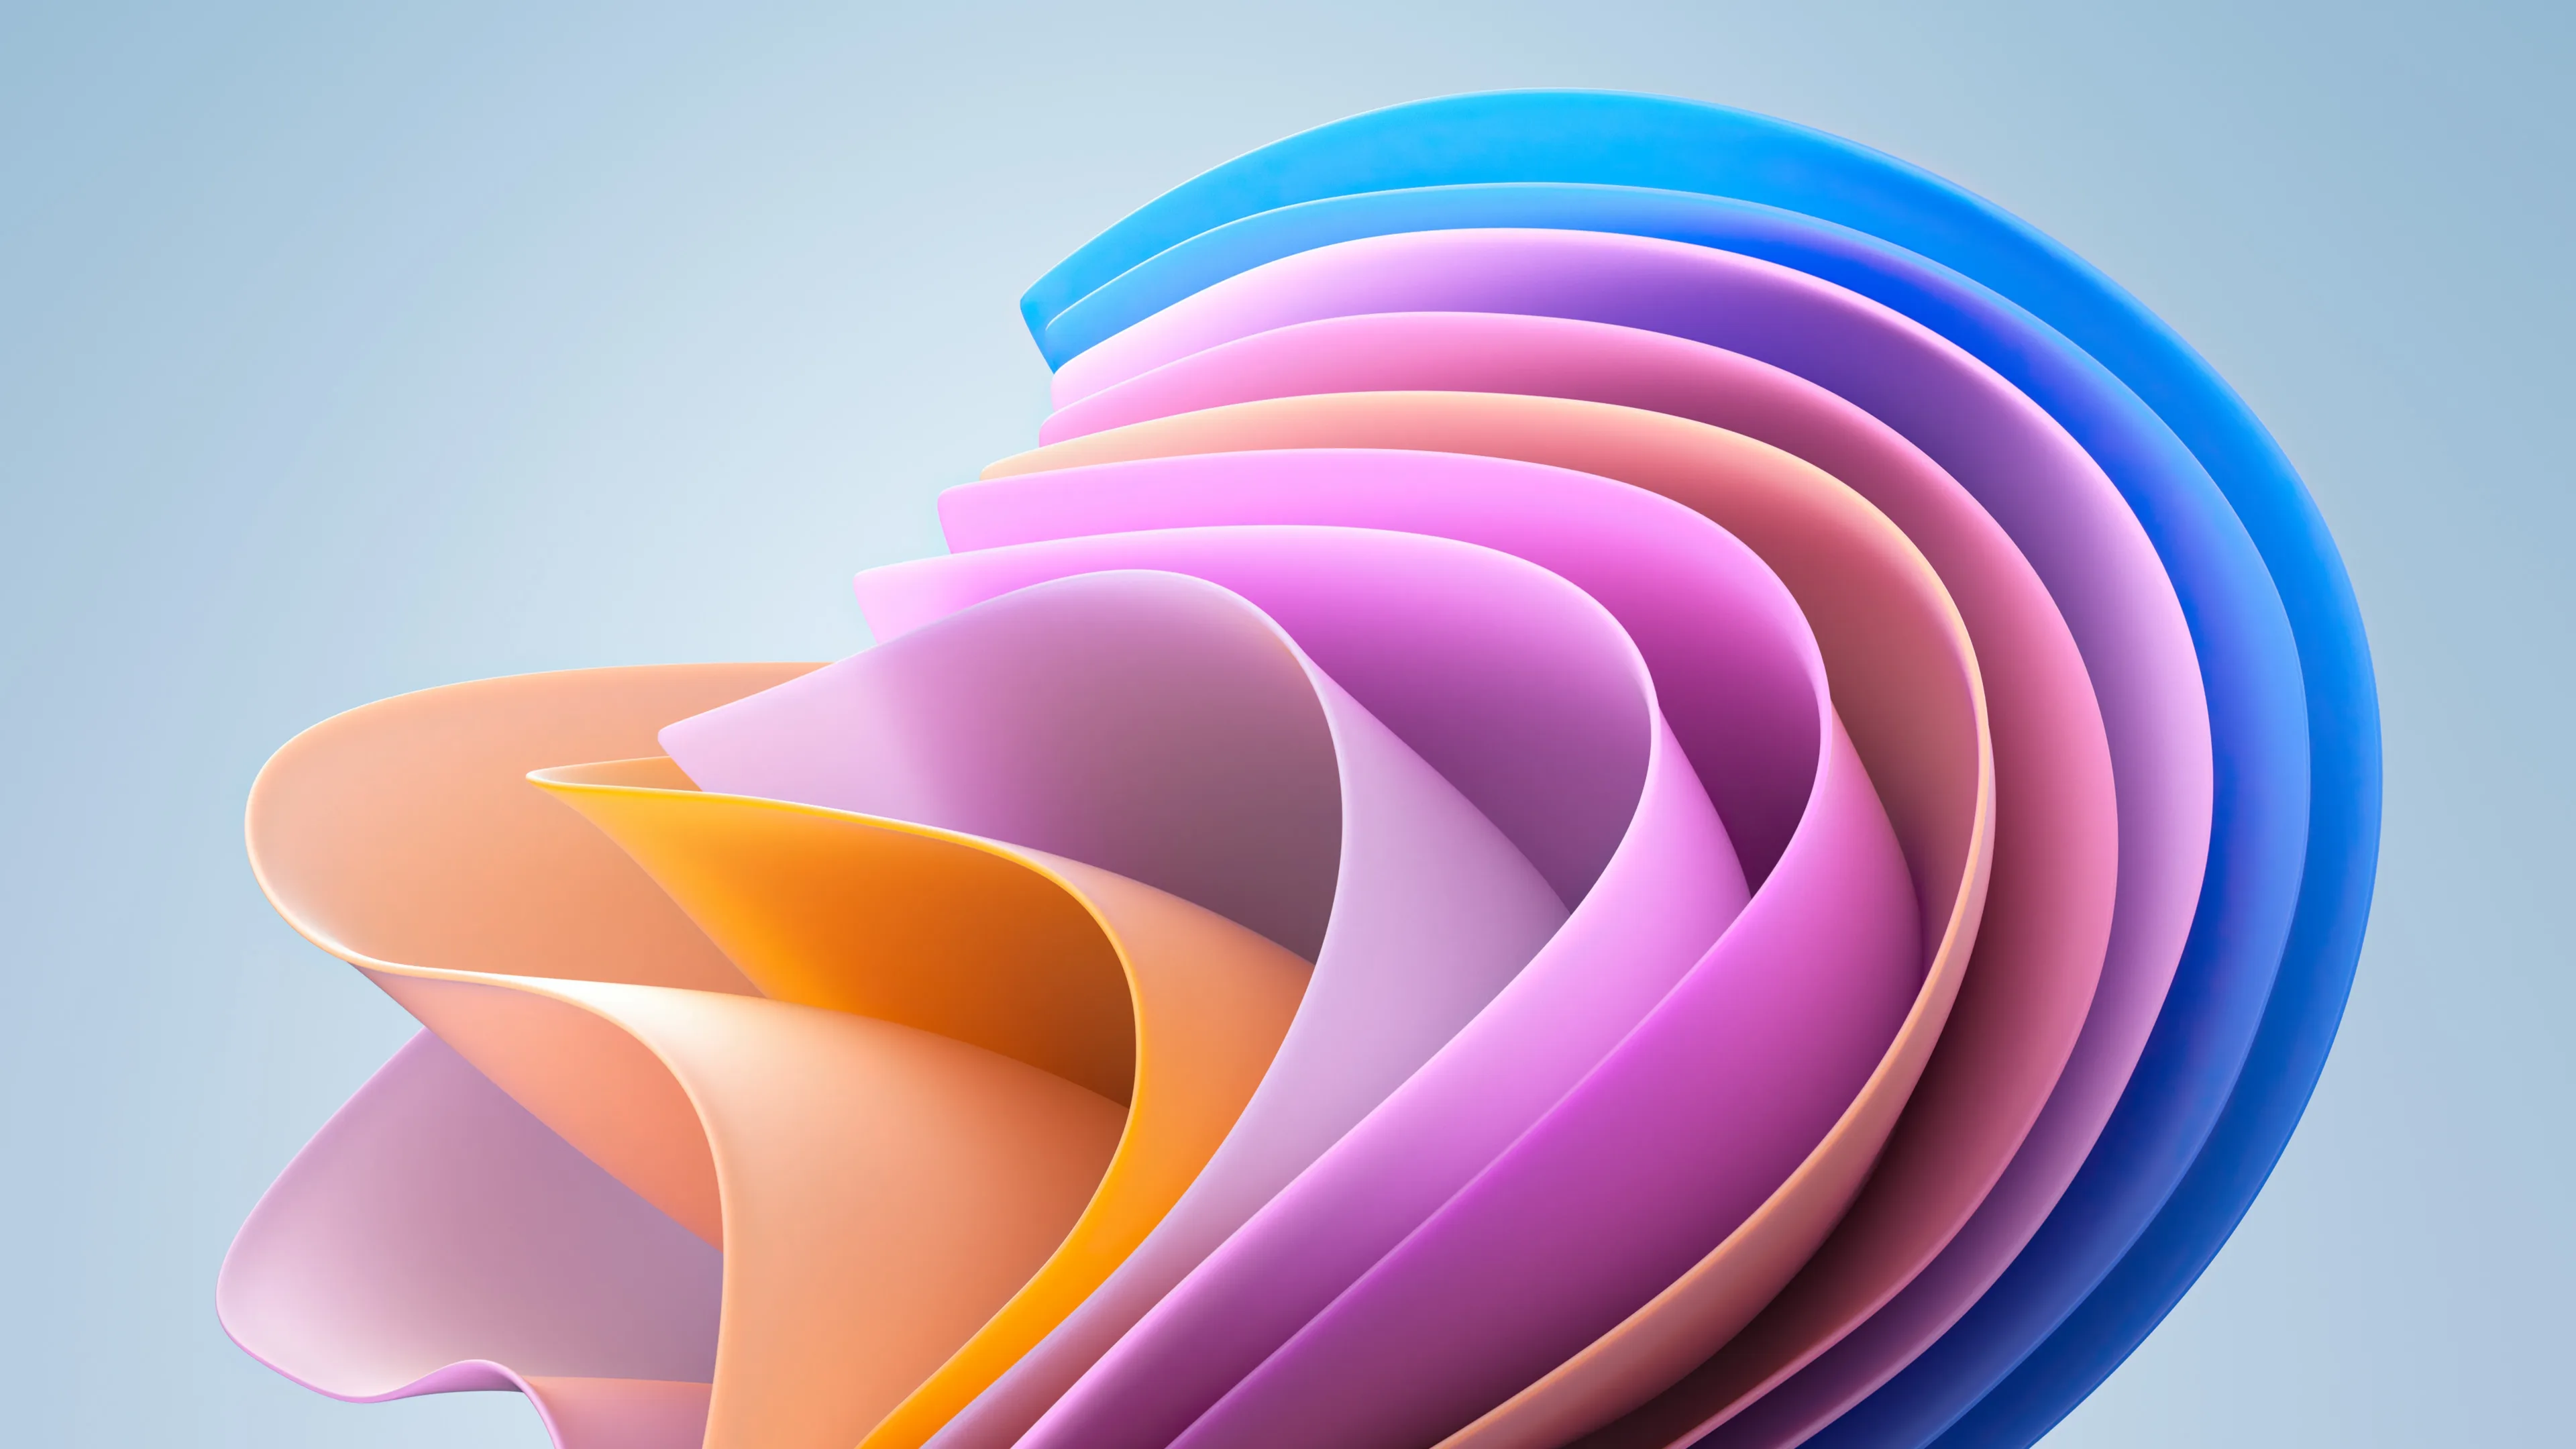 Abstract background Wallpaper 4K, 3D Render, Colorful abstract-sgquangbinhtourist.com.vn